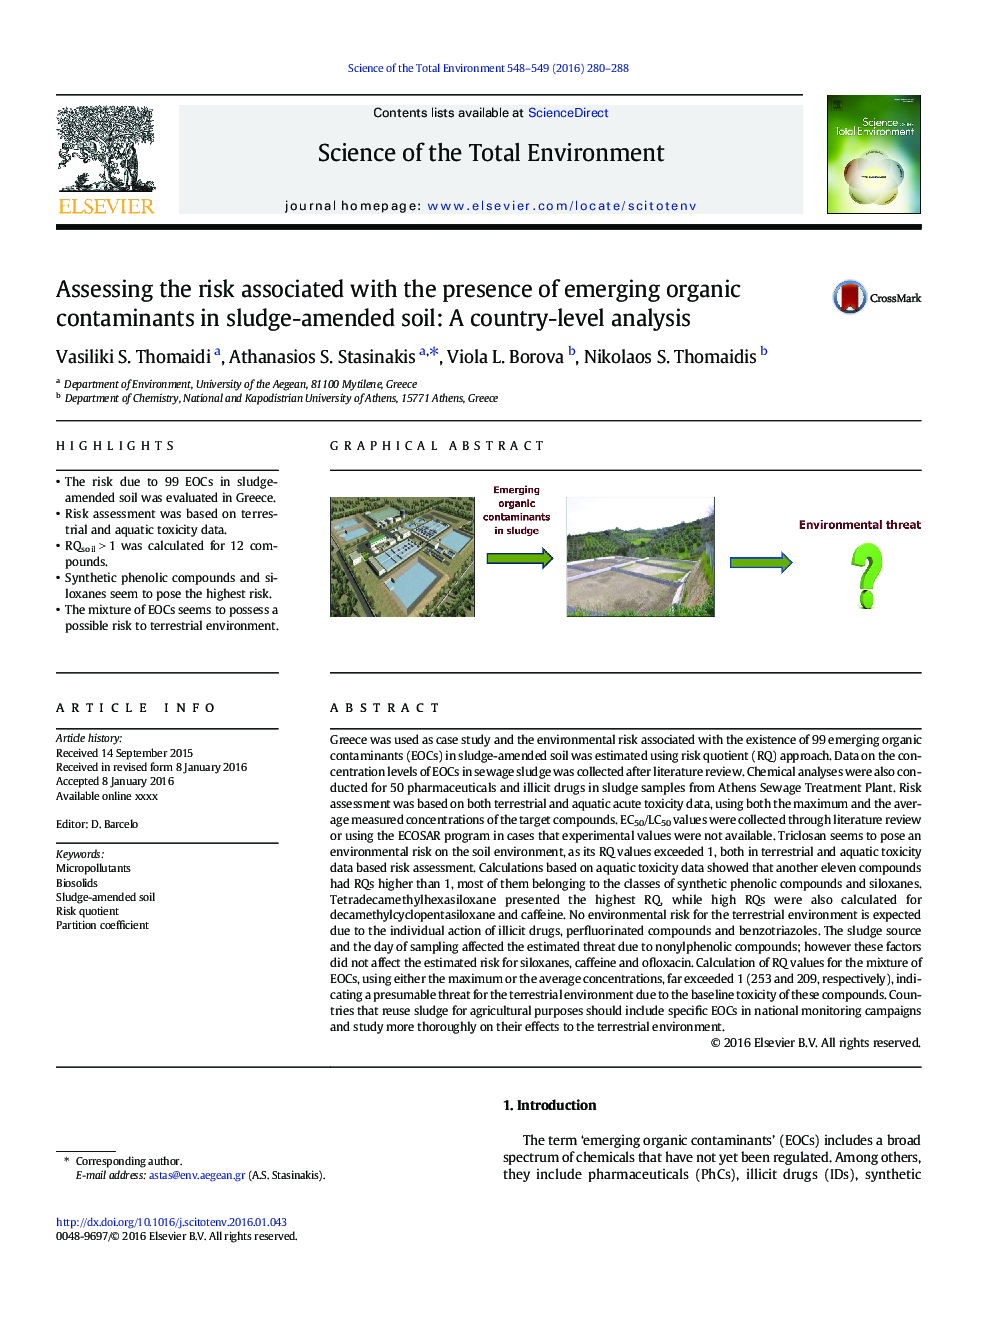 Assessing the risk associated with the presence of emerging organic contaminants in sludge-amended soil: A country-level analysis